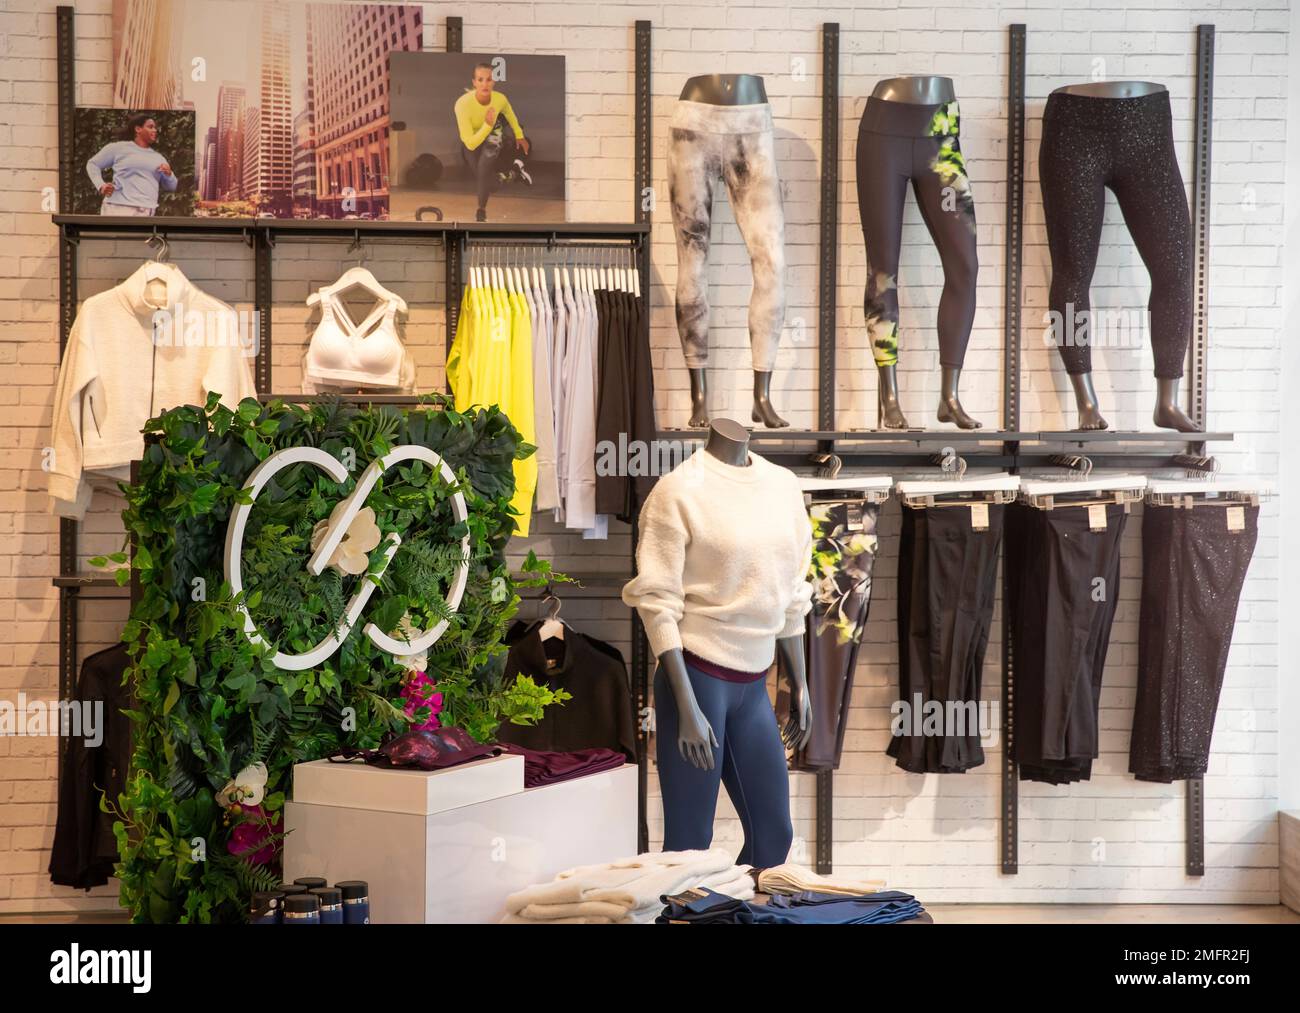 https://c8.alamy.com/comp/2MFR2FJ/image-distributed-for-calia-by-carrie-underwood-dicks-sporting-goods-launches-first-ever-pop-up-shops-for-womens-fitness-brand-calia-by-carrie-underwood-on-october-28-2020-in-santa-monica-calif-jeff-lewisap-images-for-calia-by-carrie-underwood-2MFR2FJ.jpg